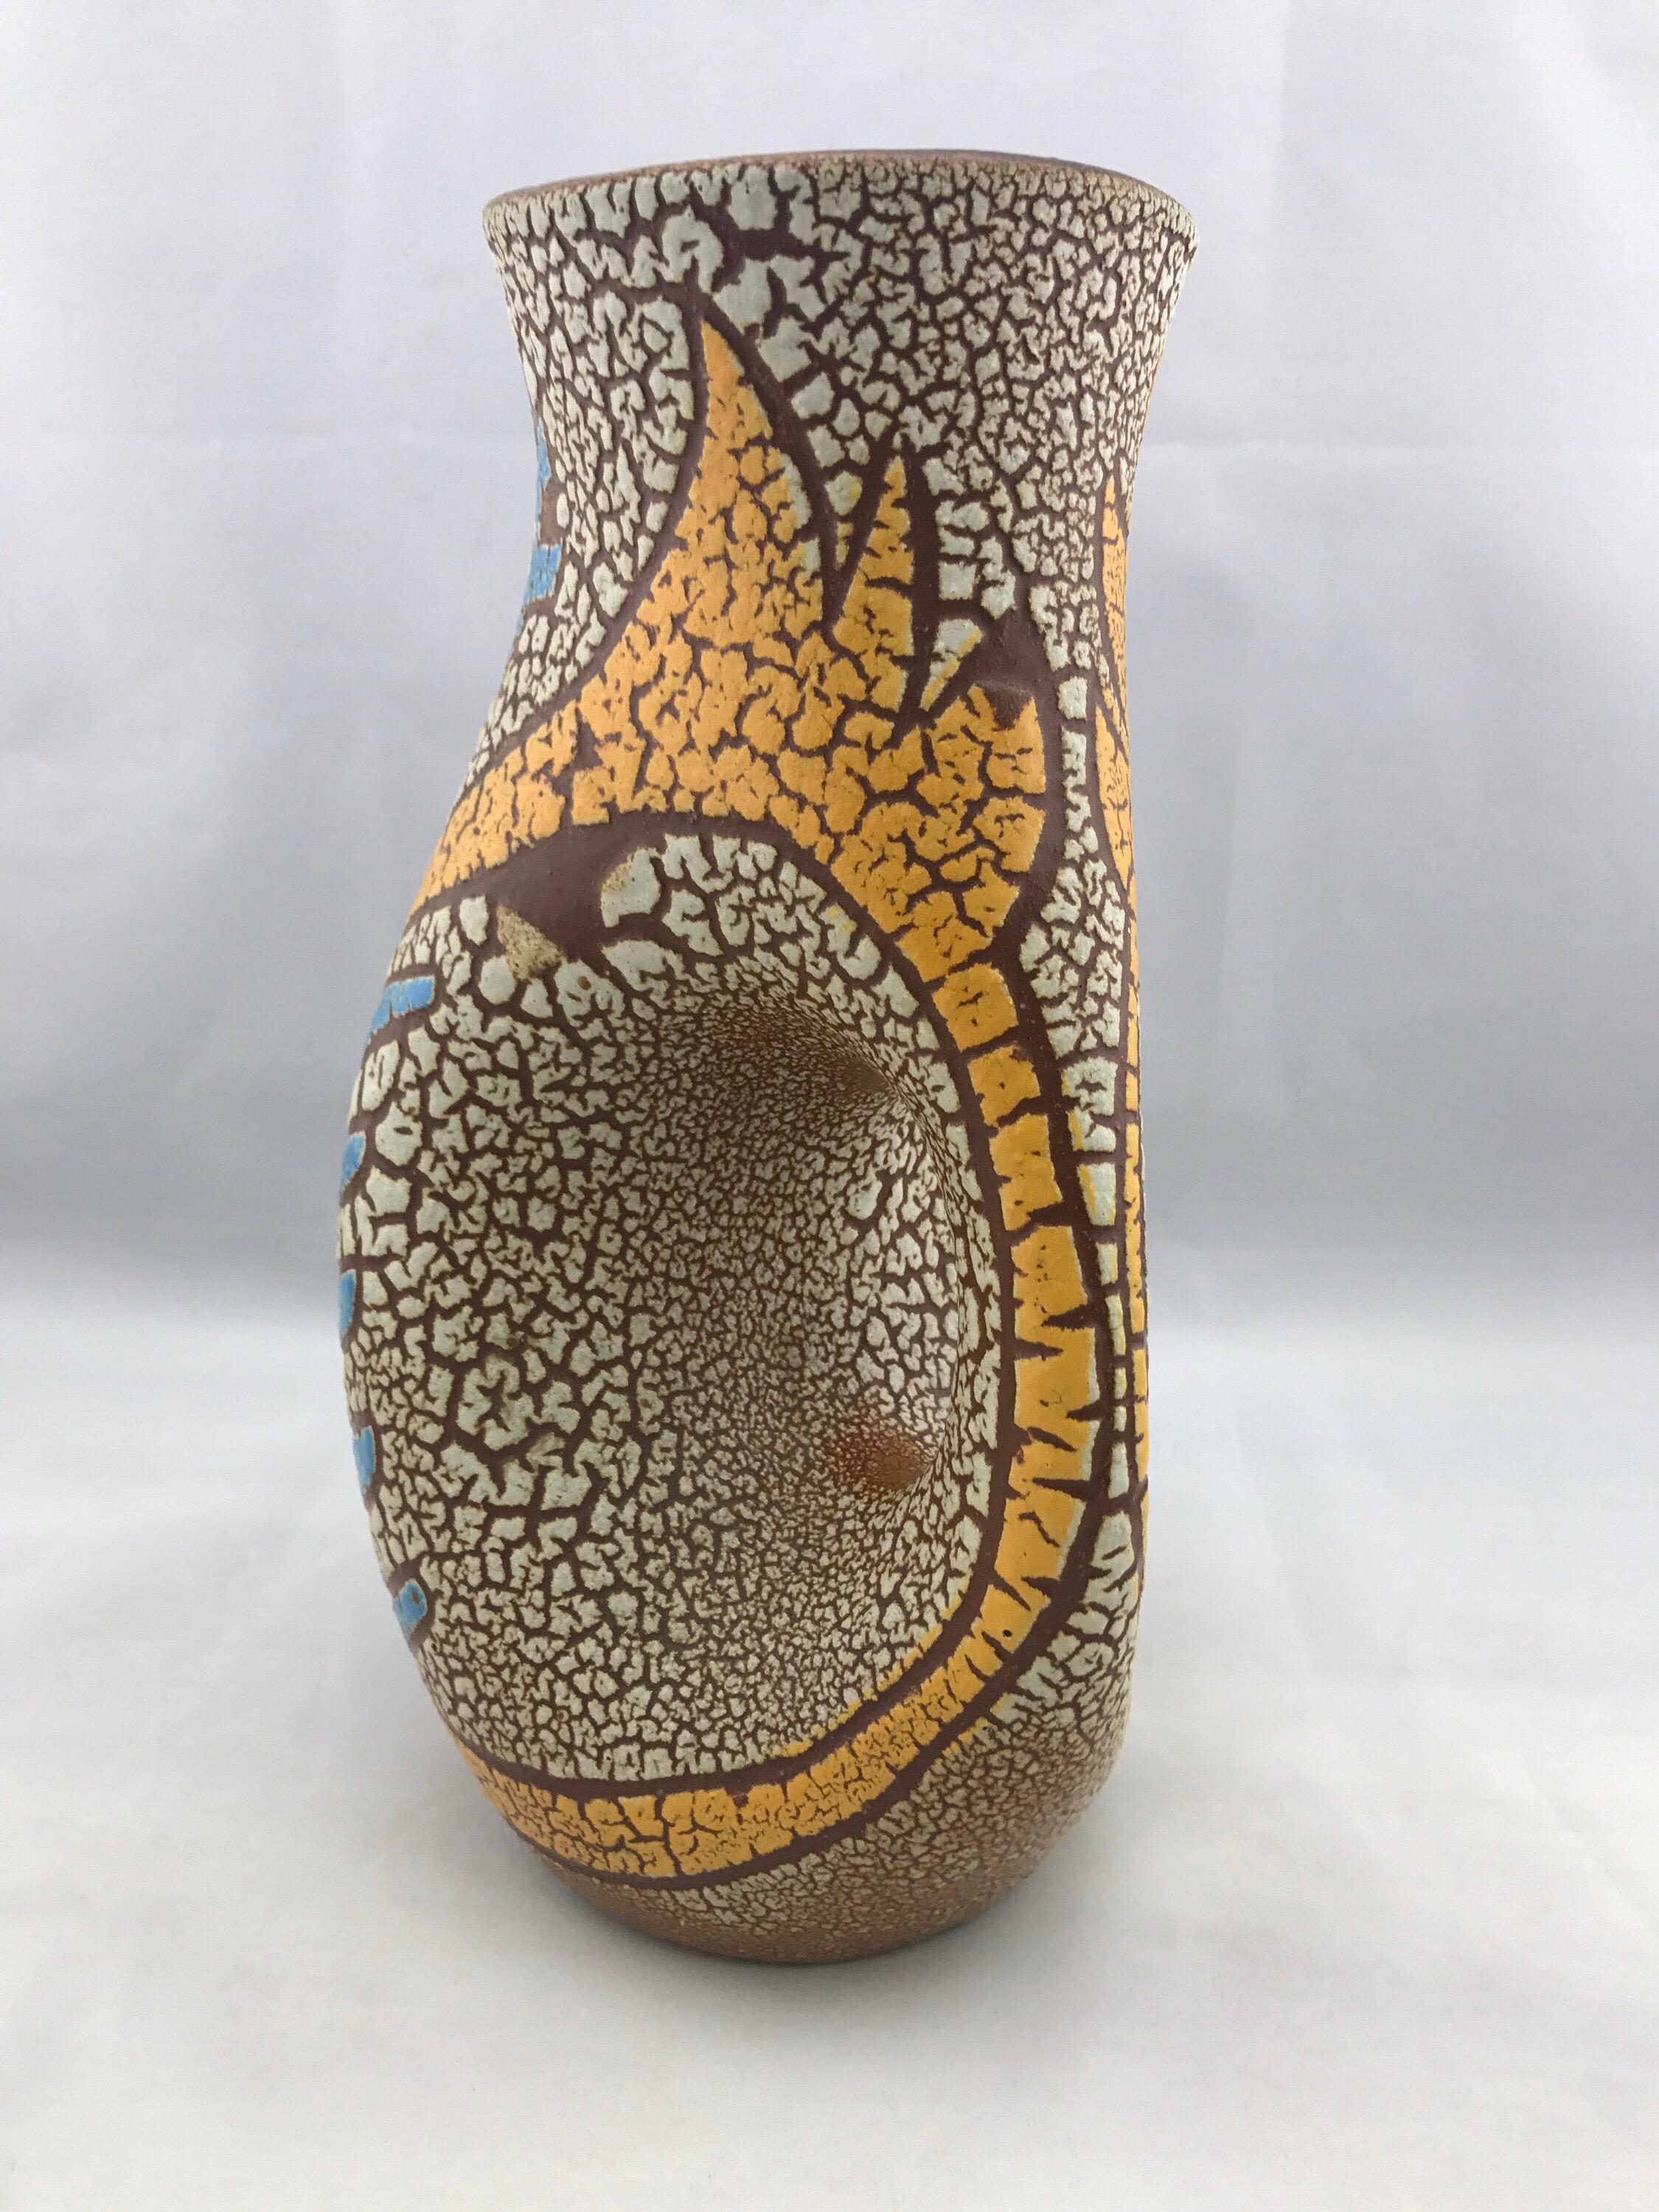 Mid-Century Modern French Vase by Accolay, Vintage Blue and Yellow Modernist Owl 1